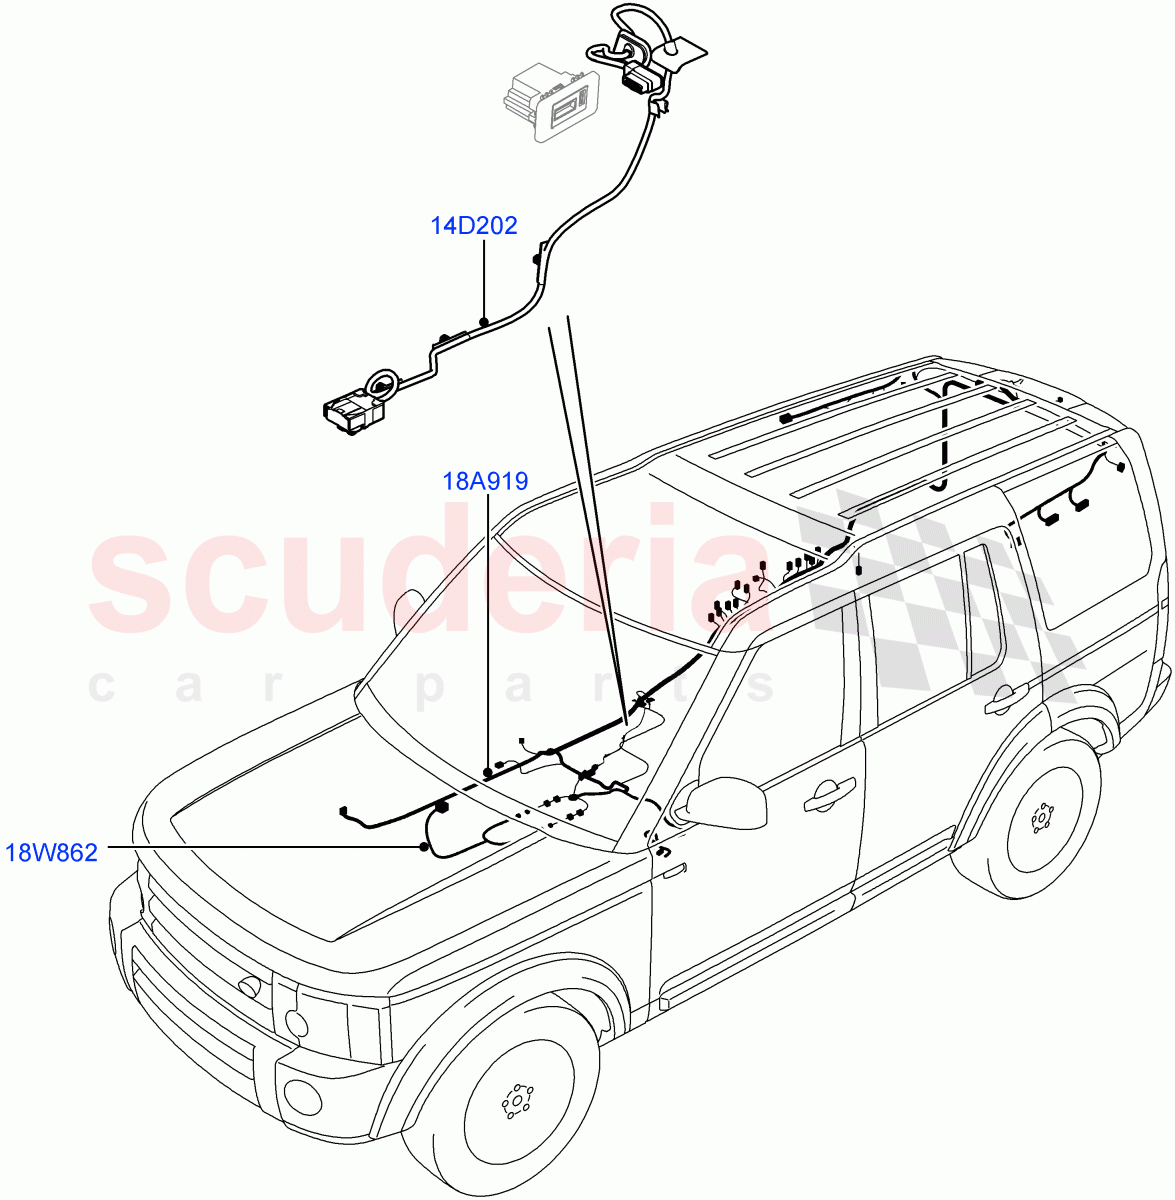 Electrical Wiring - Body And Rear(Audio/Navigation/Entertainment)((V)FROMBA000001,(V)TOBA999999) of Land Rover Land Rover Discovery 4 (2010-2016) [3.0 Diesel 24V DOHC TC]